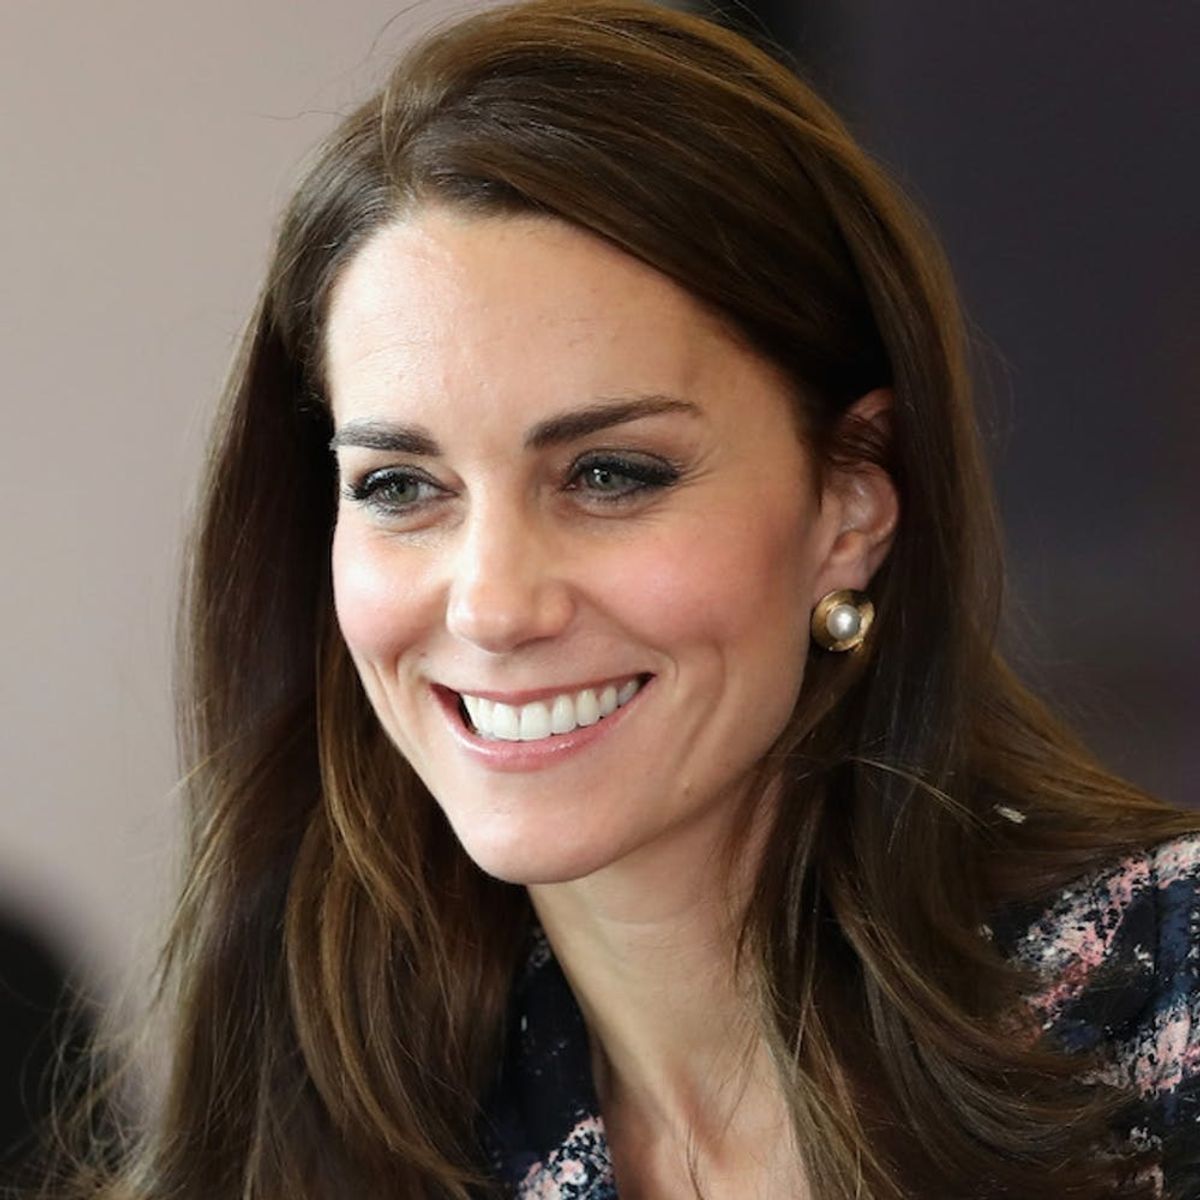 Kate Middleton’s Ankle-Length Dress Is Princess Perfection